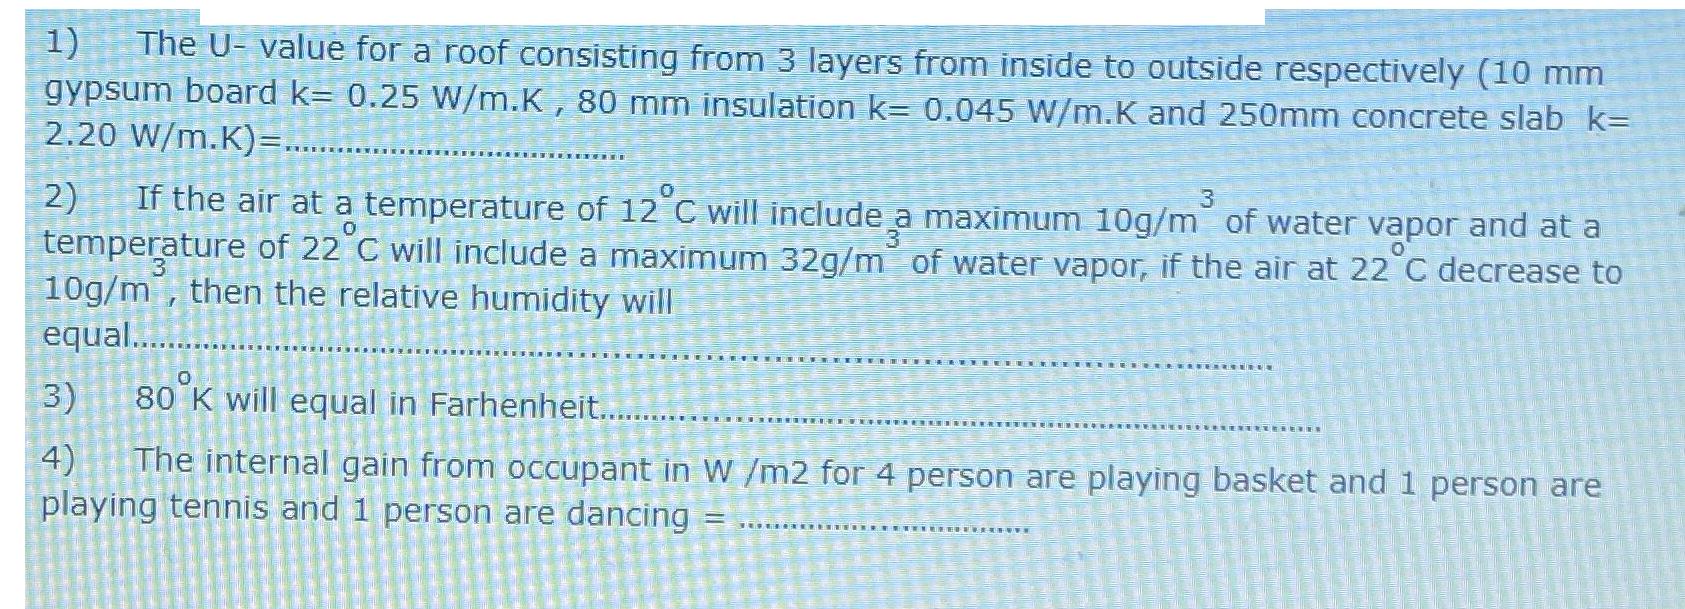 1) The U-value for a roof consisting from 3 layers from inside to outside respectively (10 mm gypsum board k=